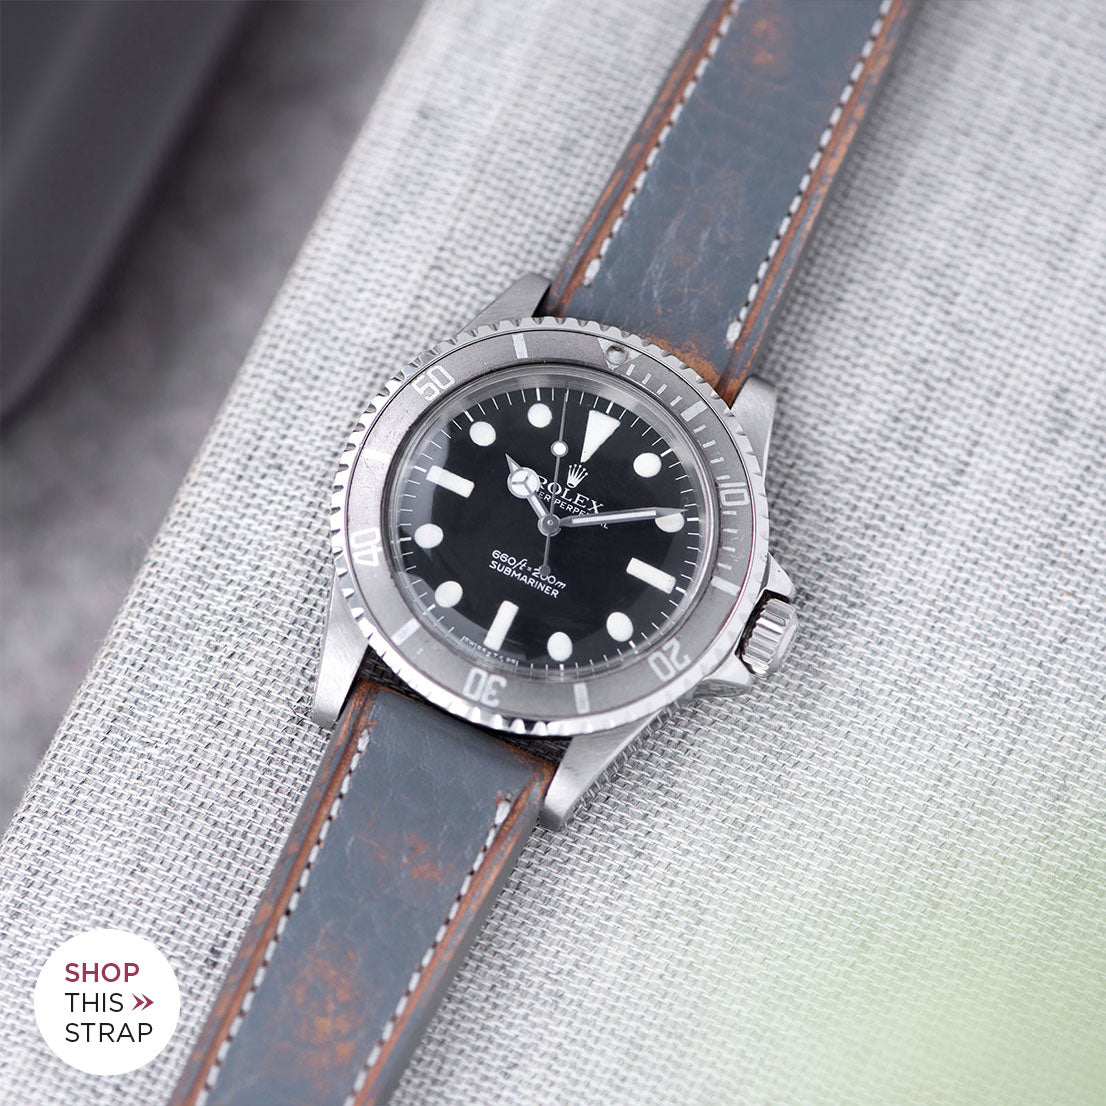 Bulang and Sons_Strap Guide_The Rolex 5513 Faded Maxi Submariner_Denim Blue Retro Leather Watch Strap